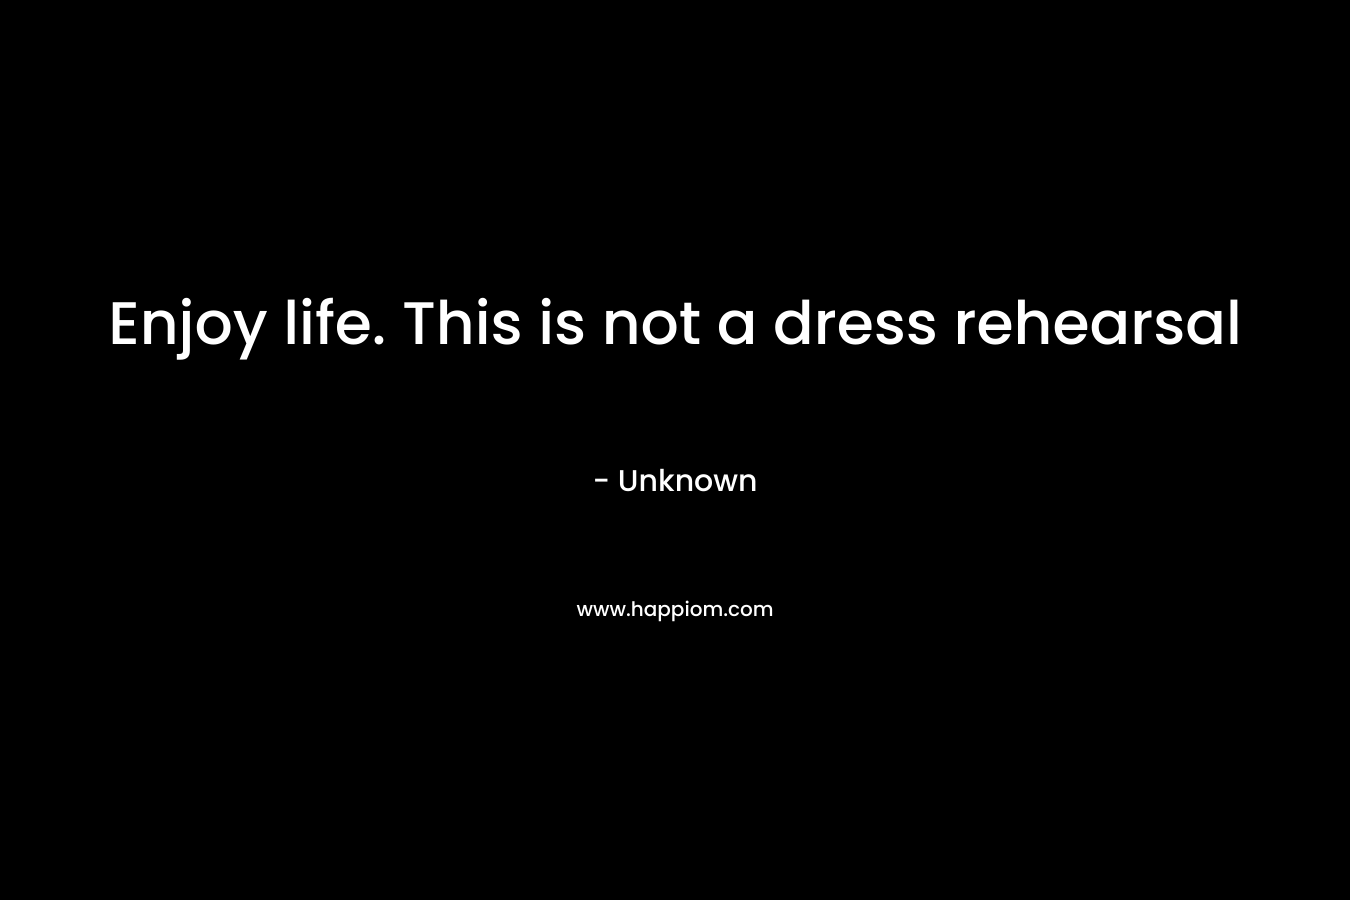 Enjoy life. This is not a dress rehearsal